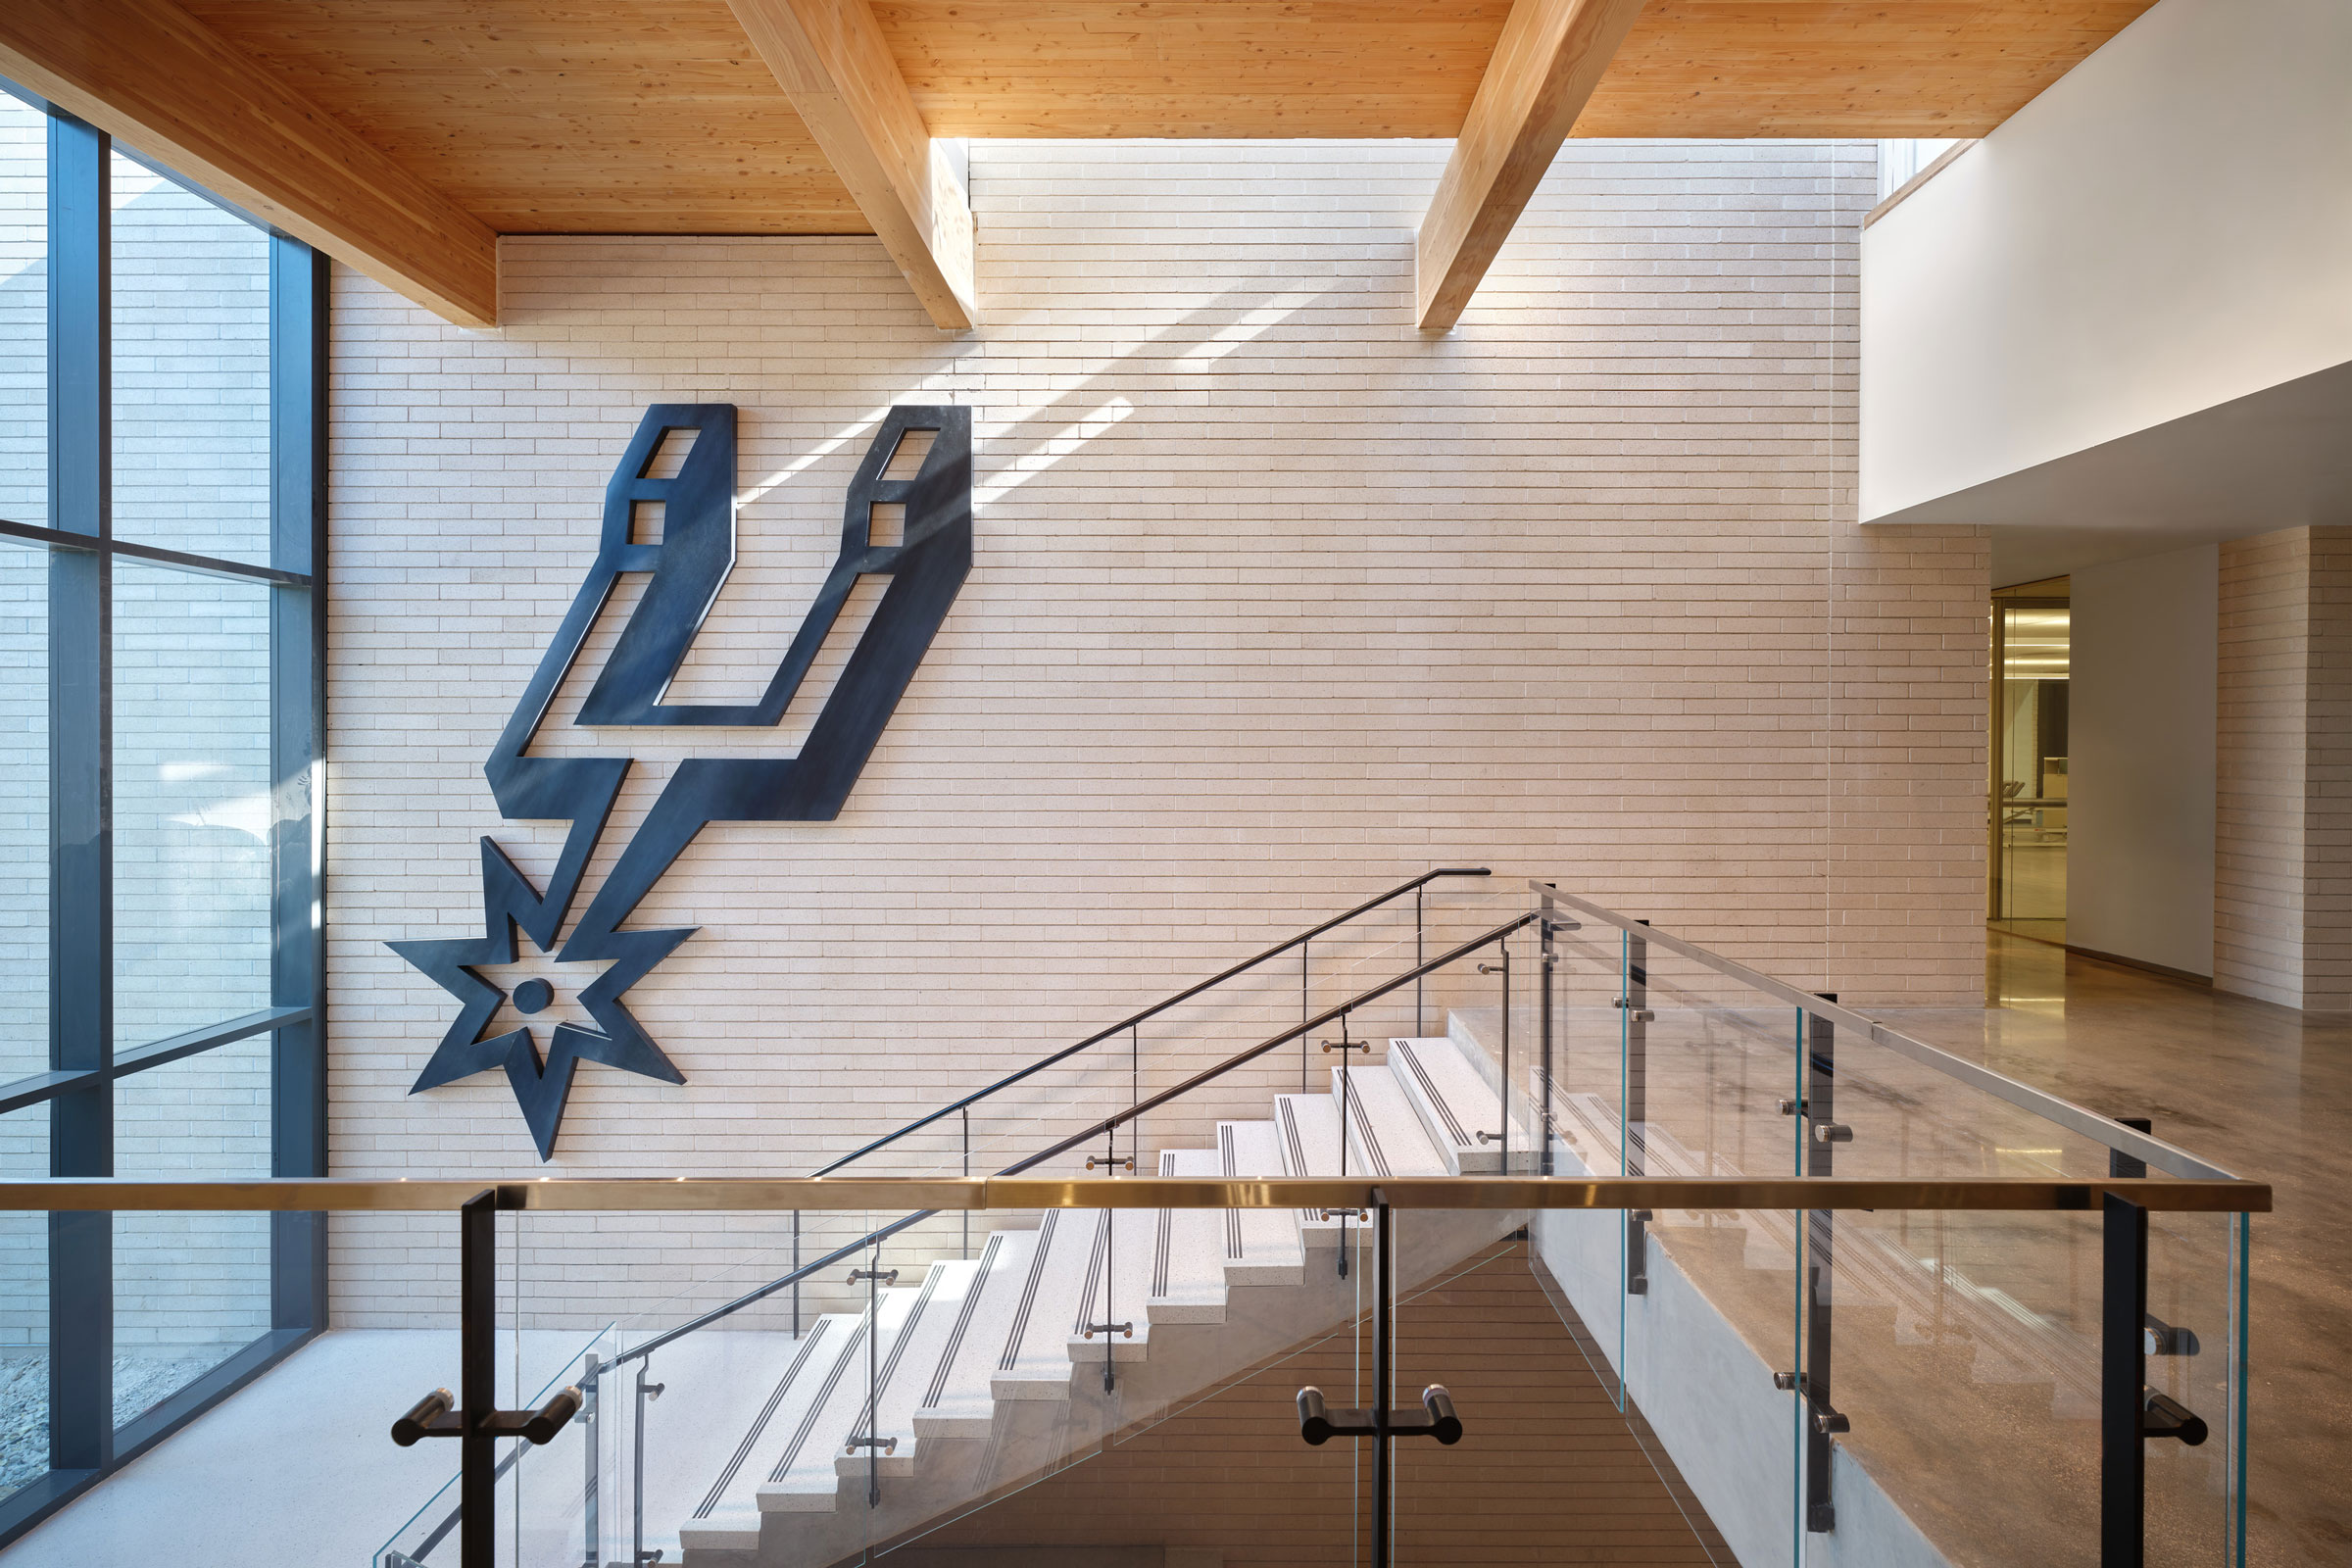 ZGF’s Victory Capital Performance Center Design Focuses on People